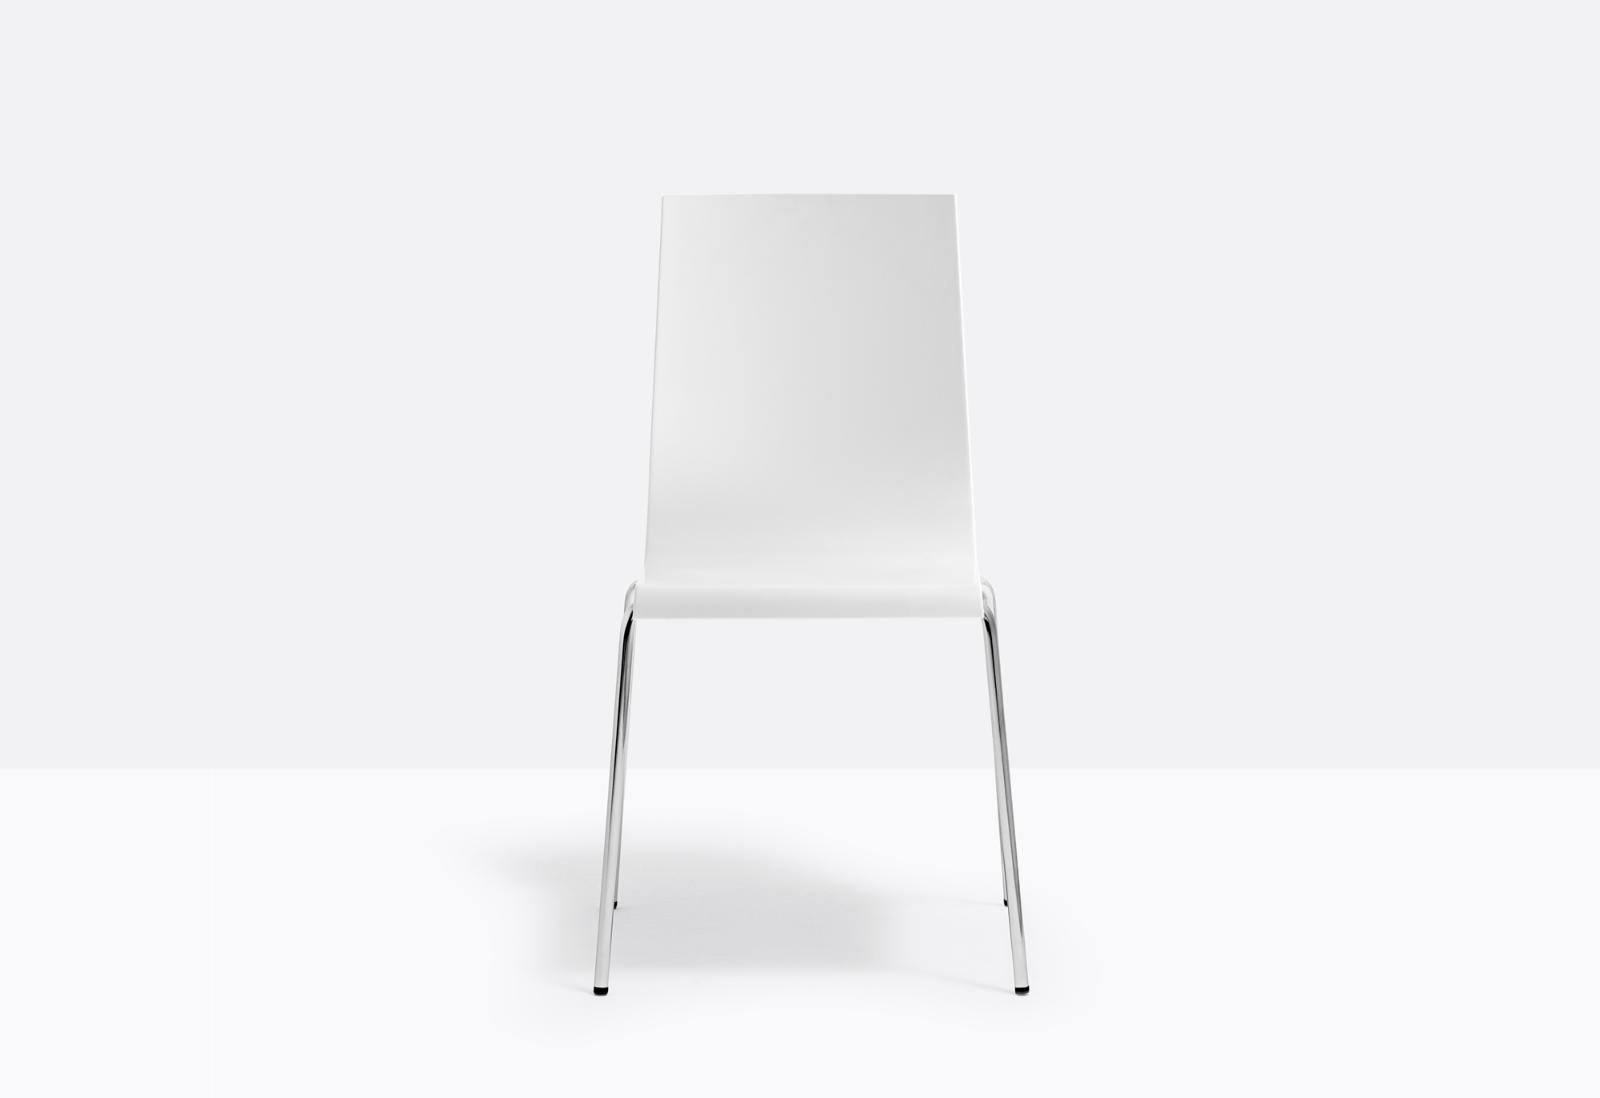 Kuadra Chair 1151 from Pedrali, designed by Pedrali R&D